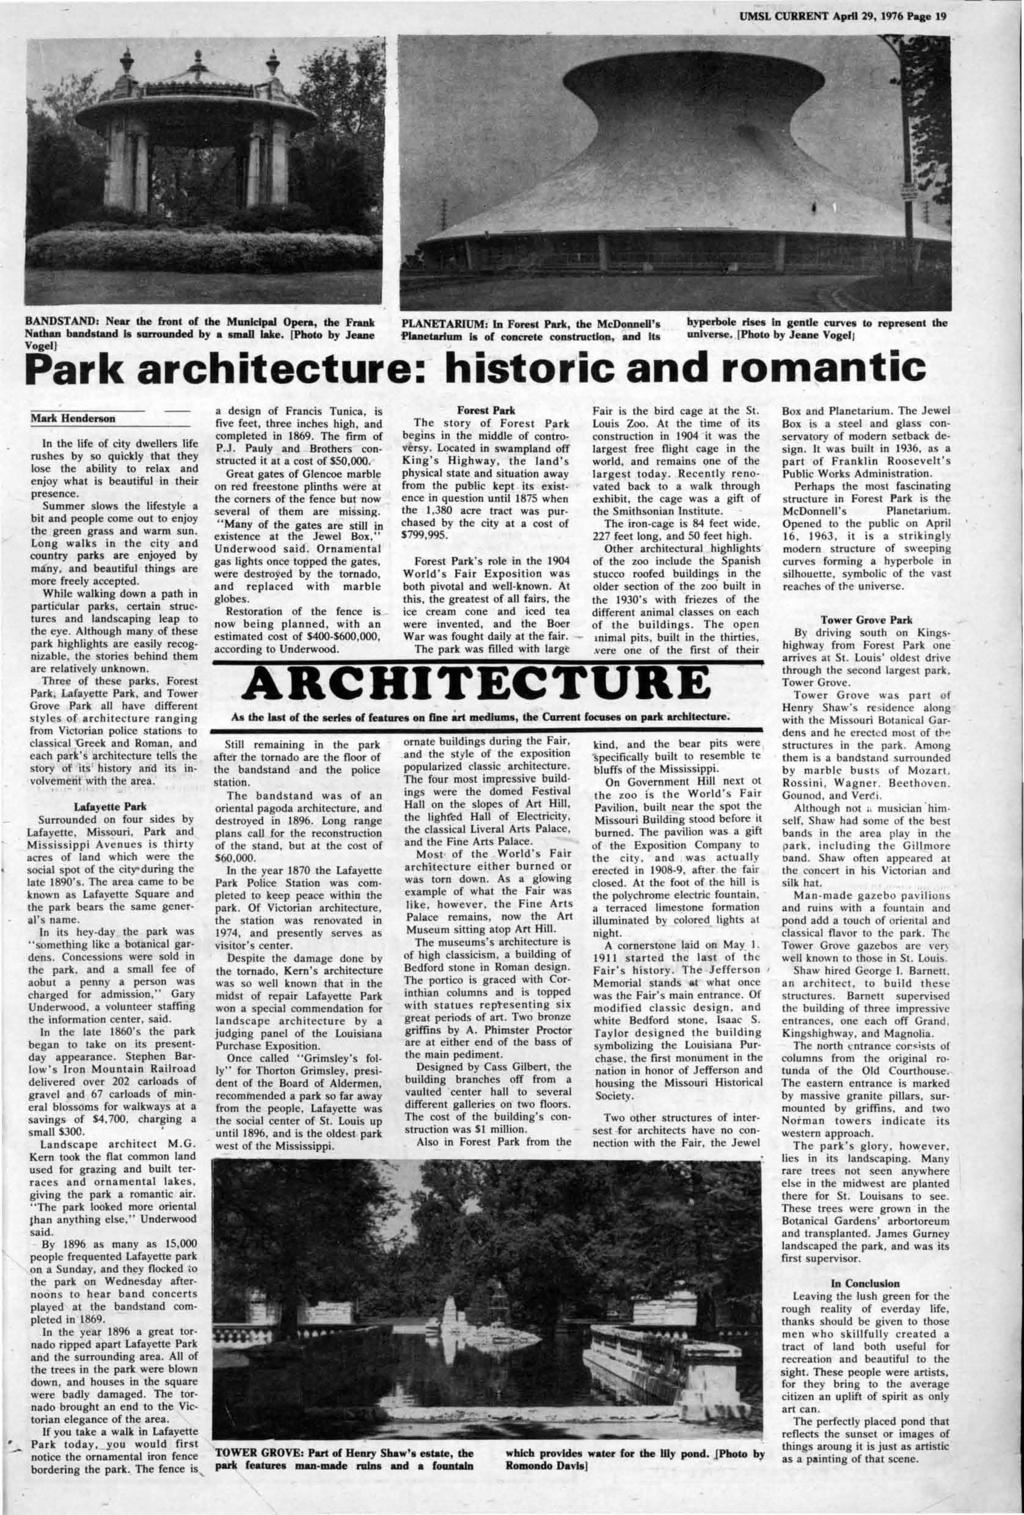 UMSL CURRENT AprU 29,1976 Page 19, BANDSTAND: Near the front of the Municipal Opera, the Frank PLANETARIUM: In Forest Park, the McDonneU's hyperbole rises In gende curves to represent the Nathan